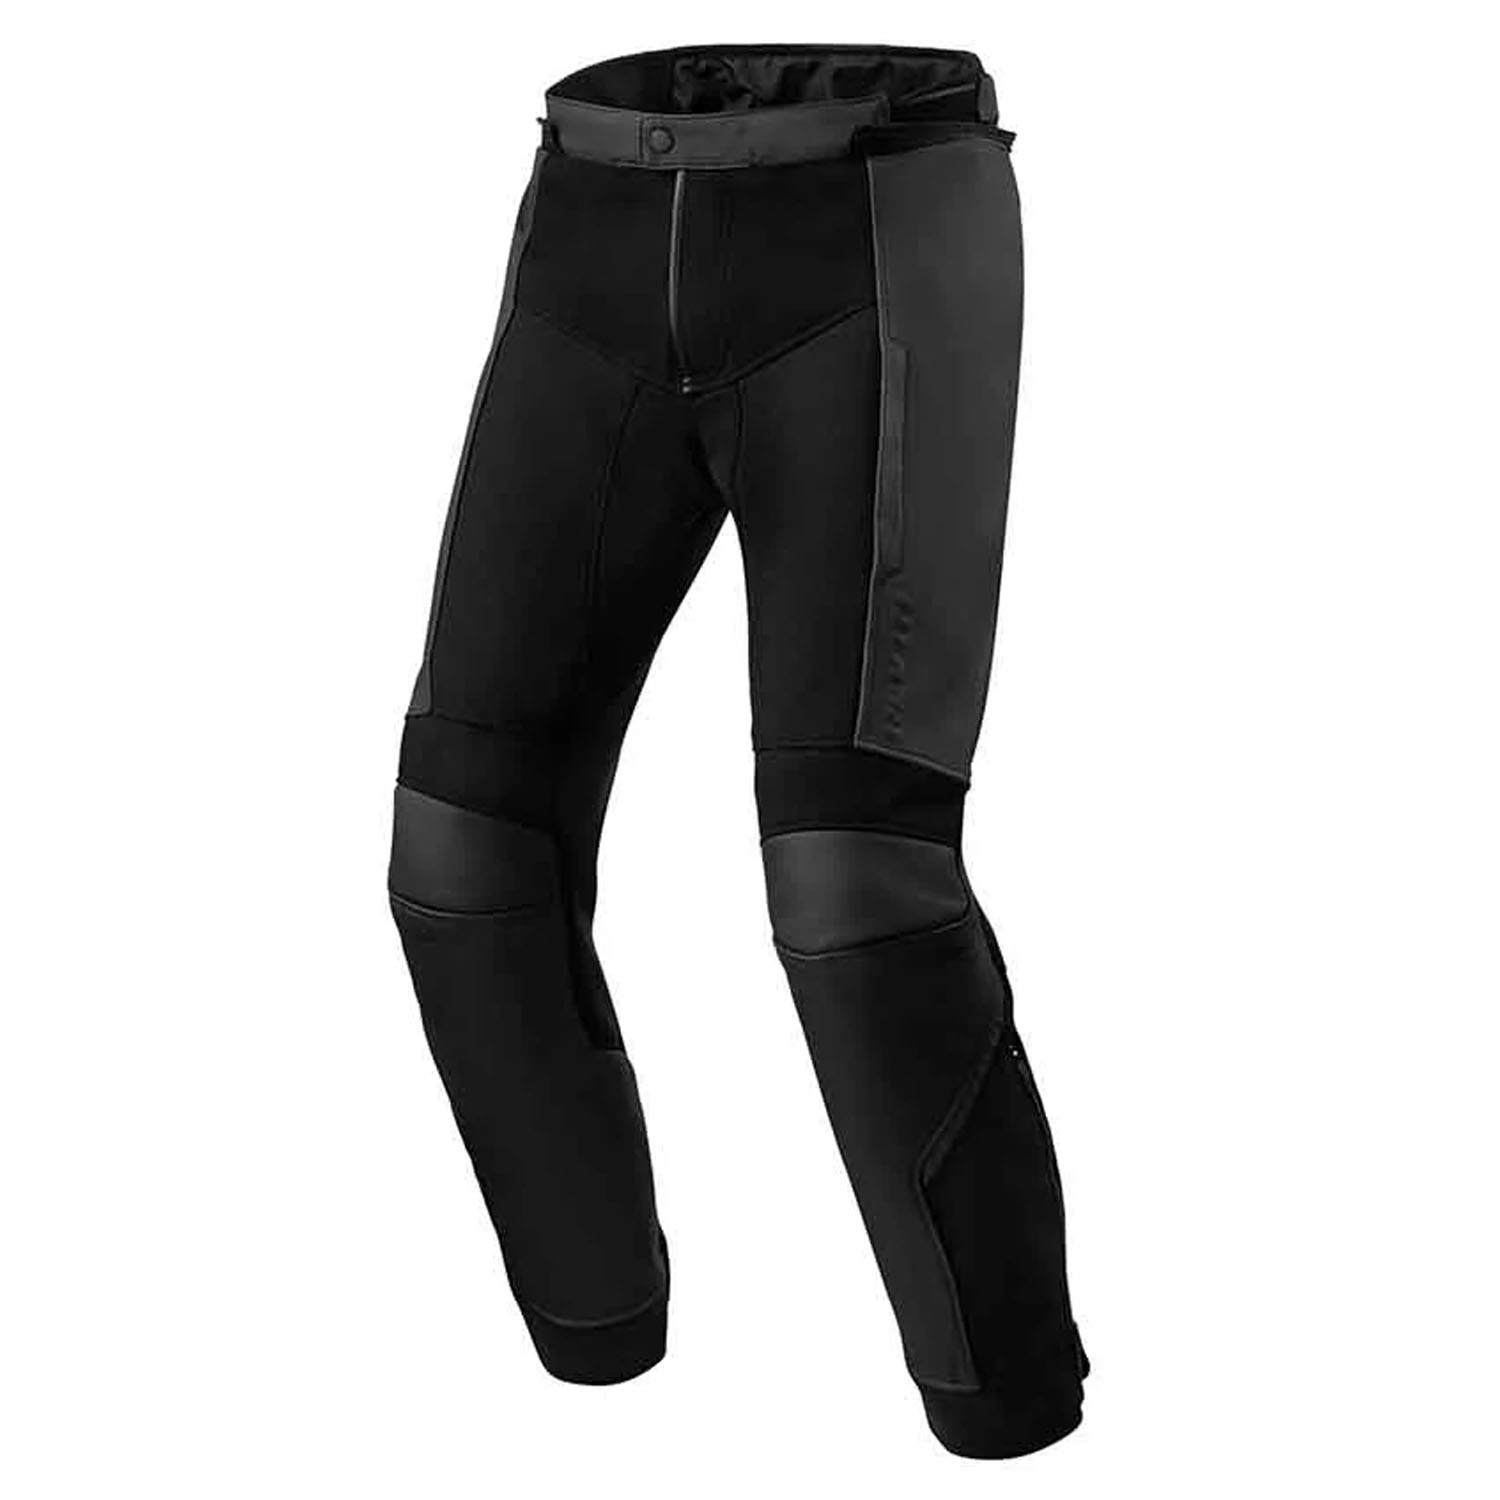 Image of REV'IT! Ignition 4 H2O Black Long Motorcycle Pants Size 54 ID 8700001359436